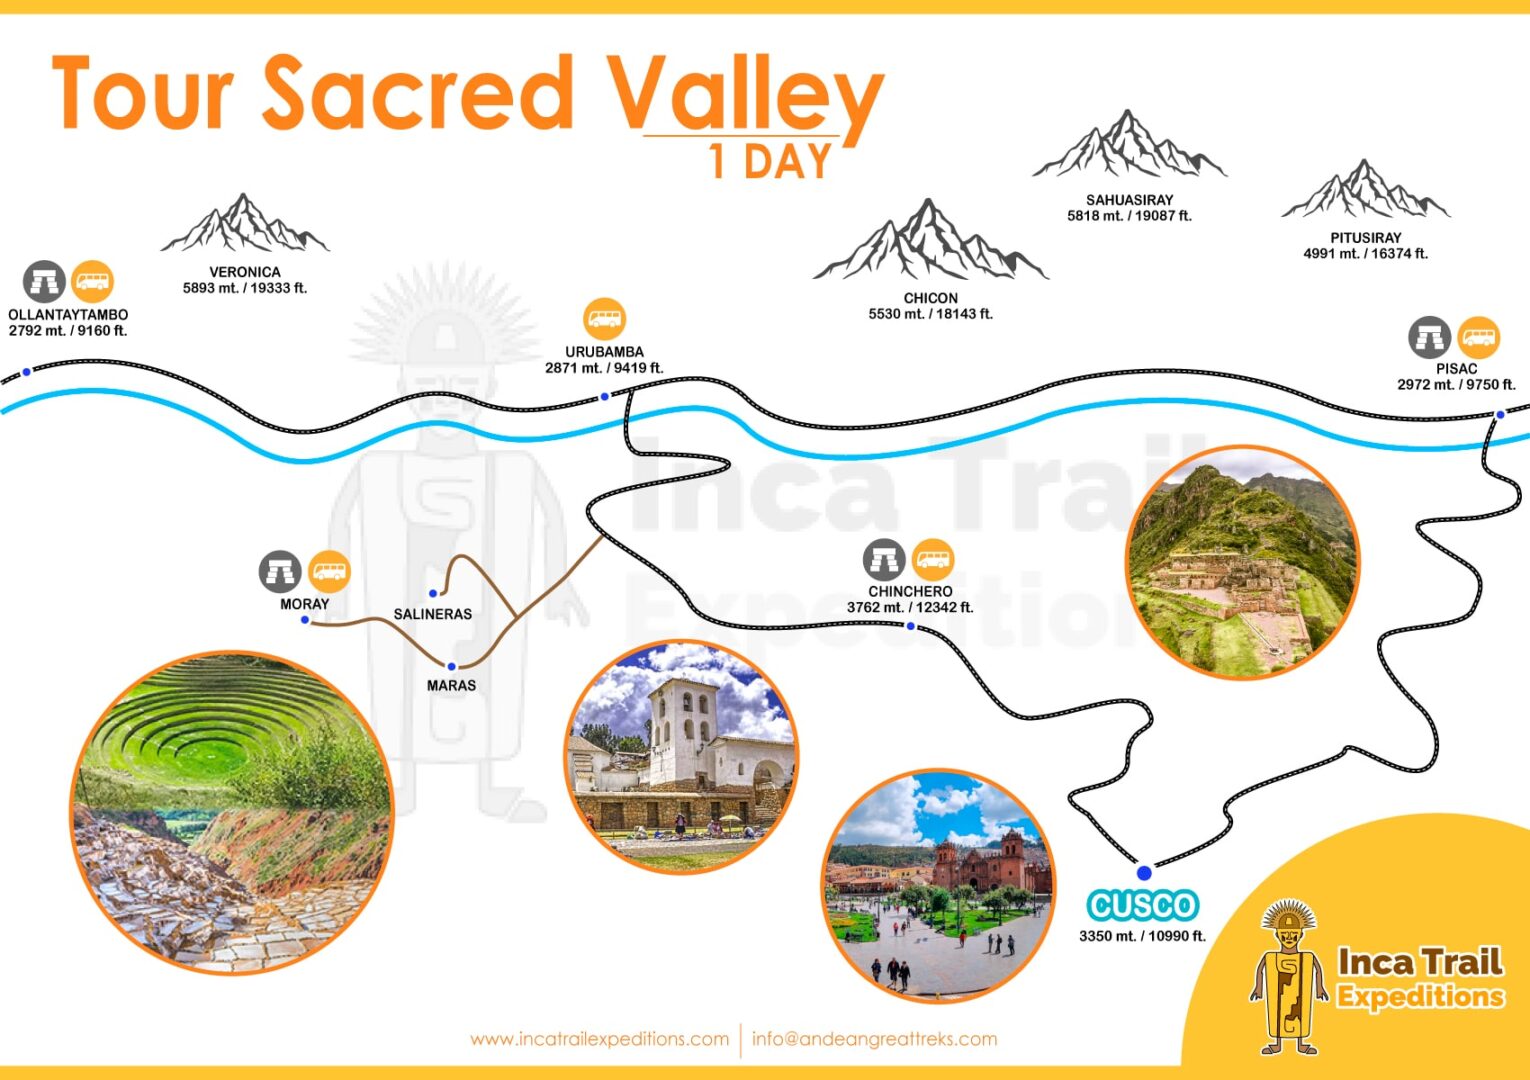 SACRED-VALLEY-1DAY-BY-INCA-TRAIL-EXPEDITIONS